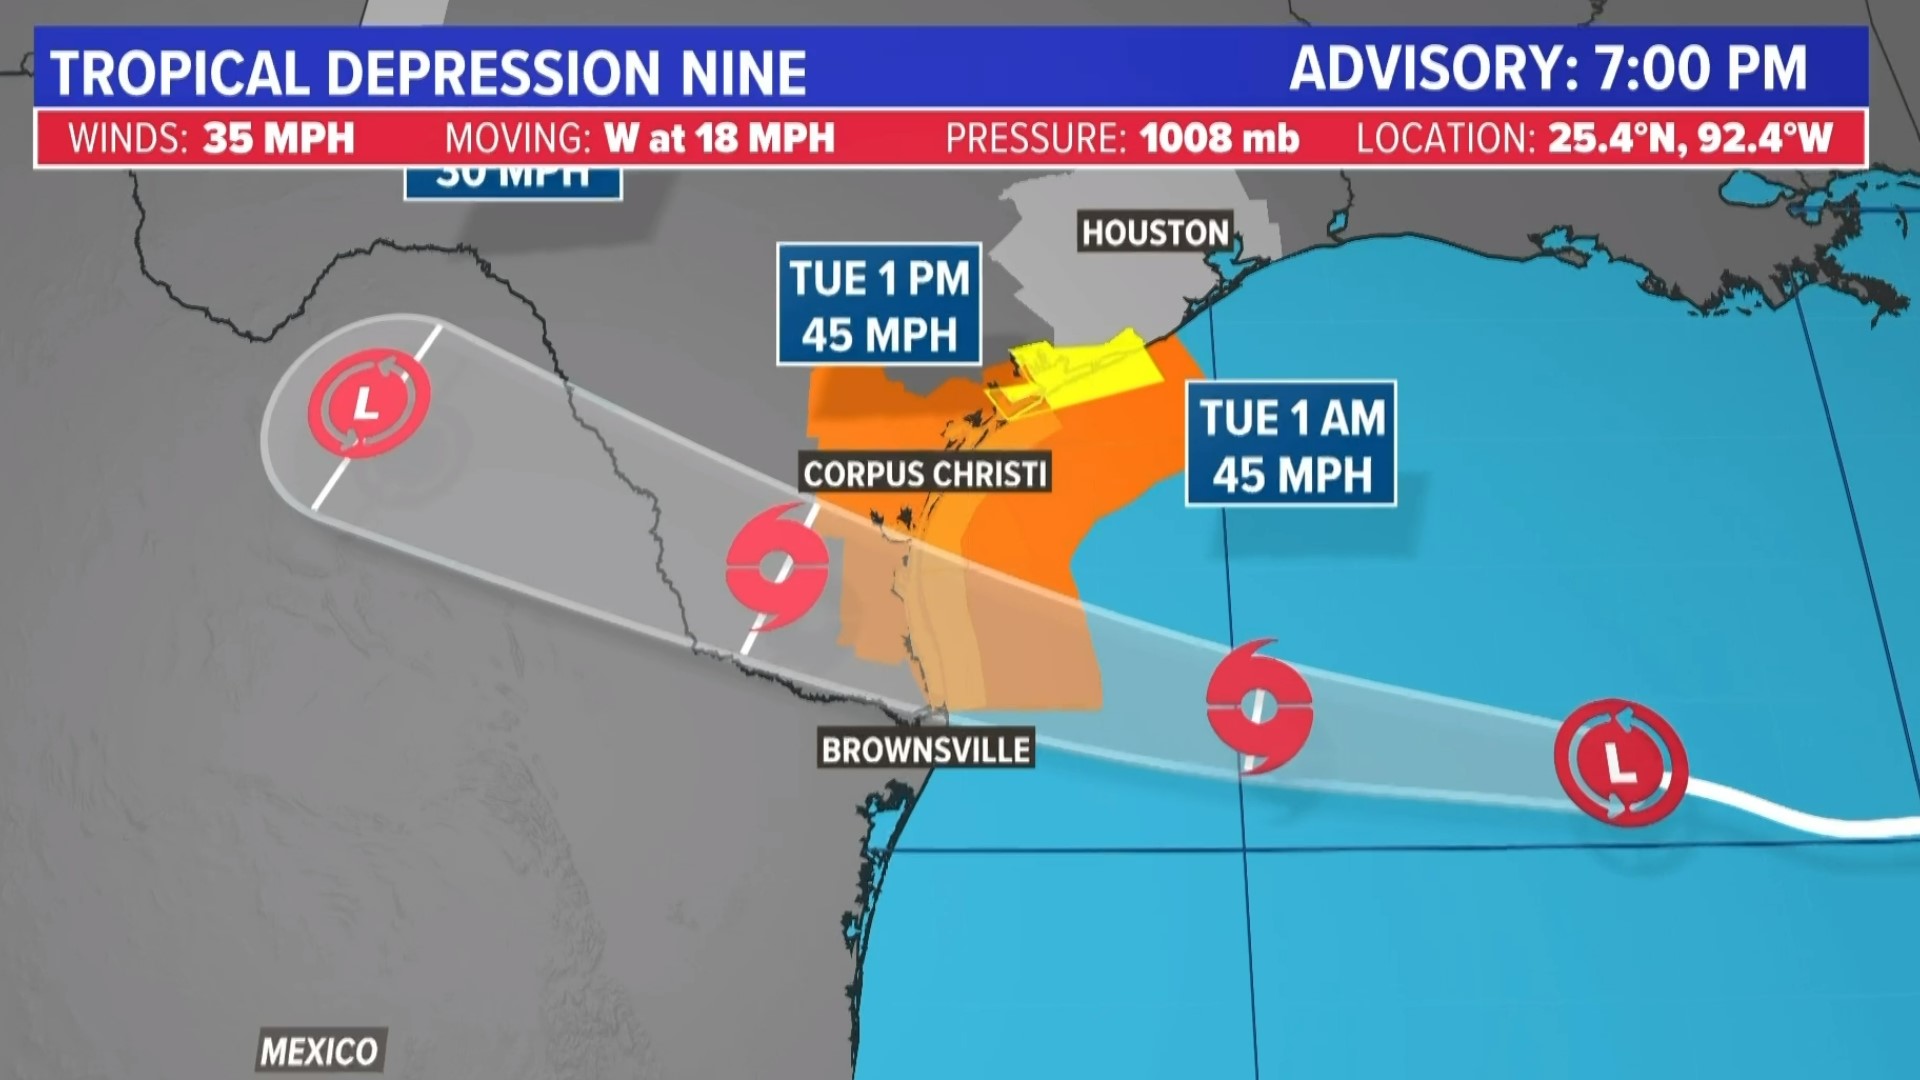 Chief Meteorologist David Paul is tracking the storm, which is expected to reach the South Texas coast Tuesday morning.